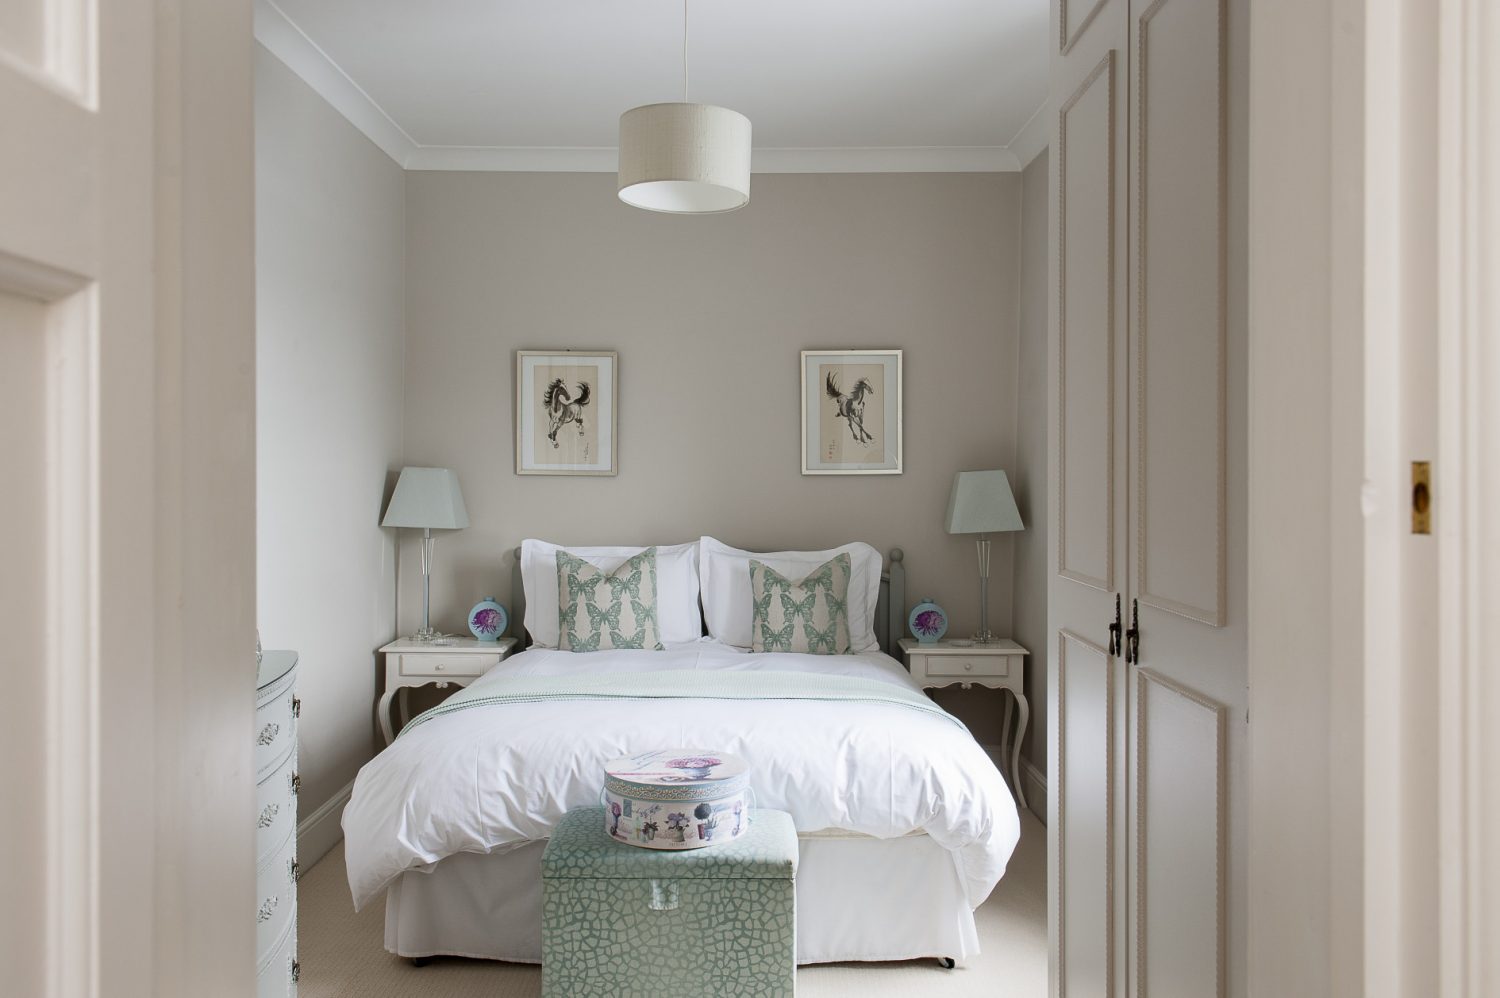 A guest bedroom features accents of robin’s egg blue